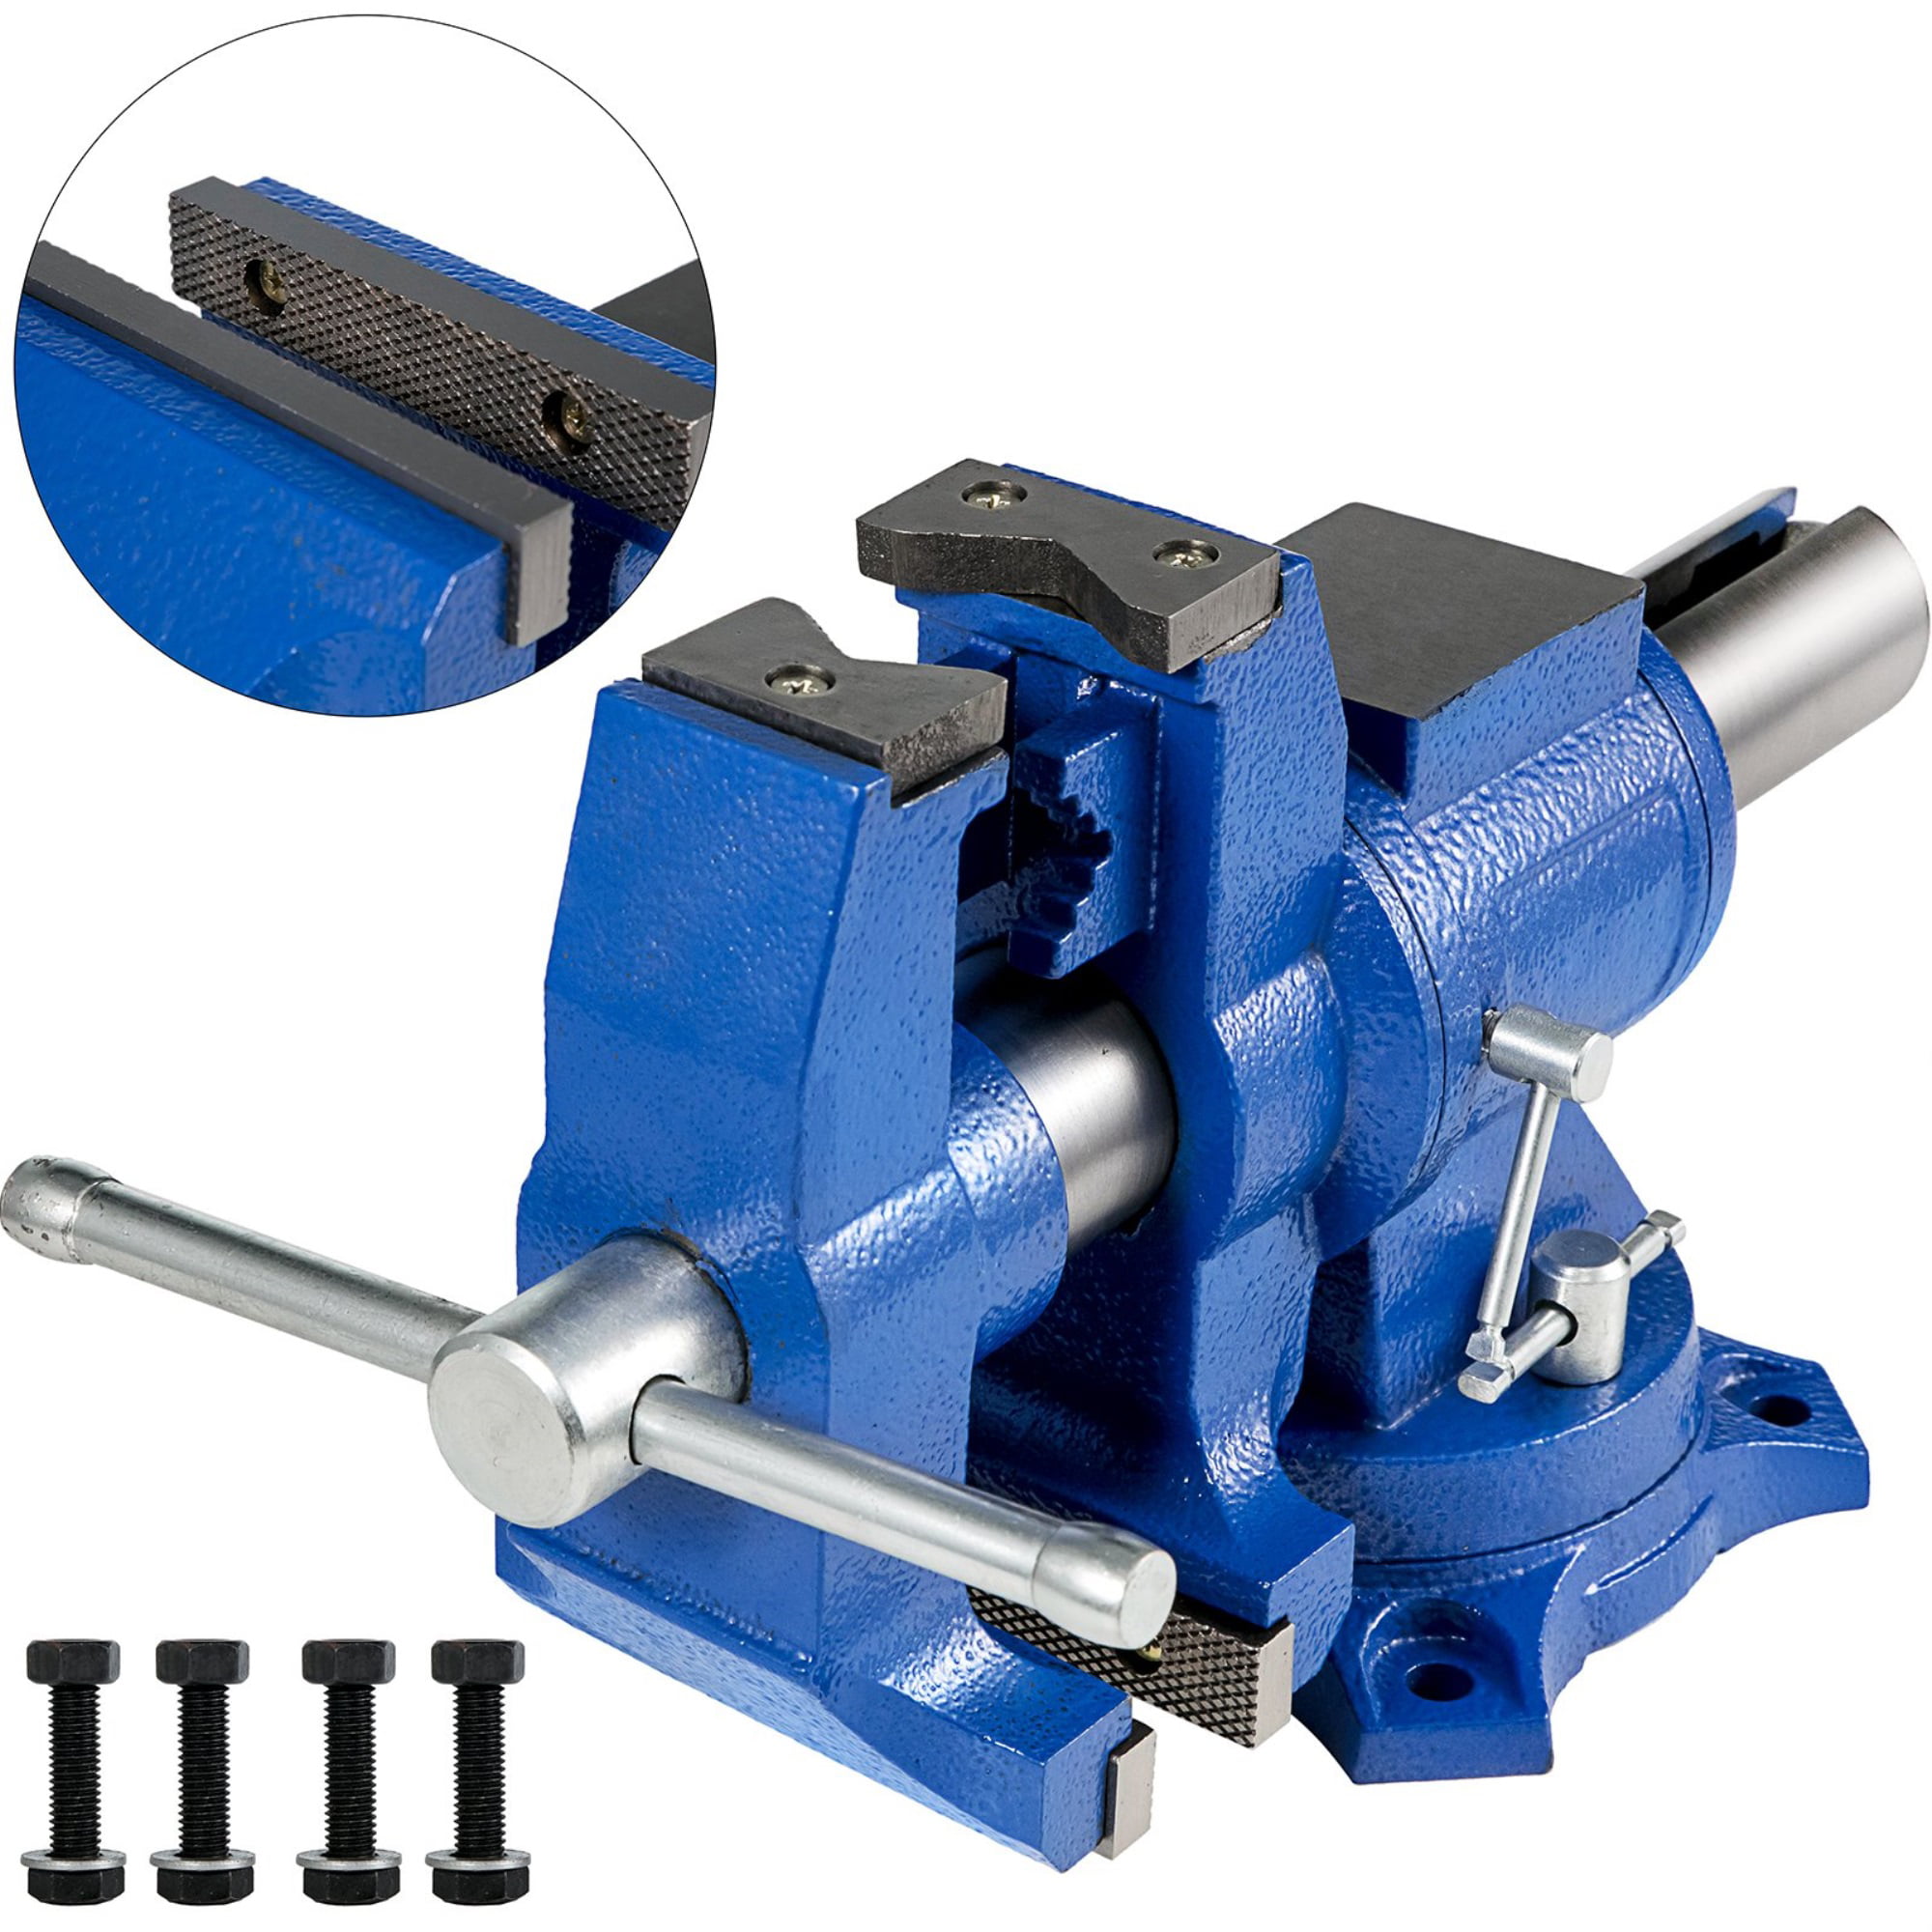 Details about   7in Woodworking Heavy Duty Table Vise Clamp Bed Clip Fixed Repair Vice Tool New